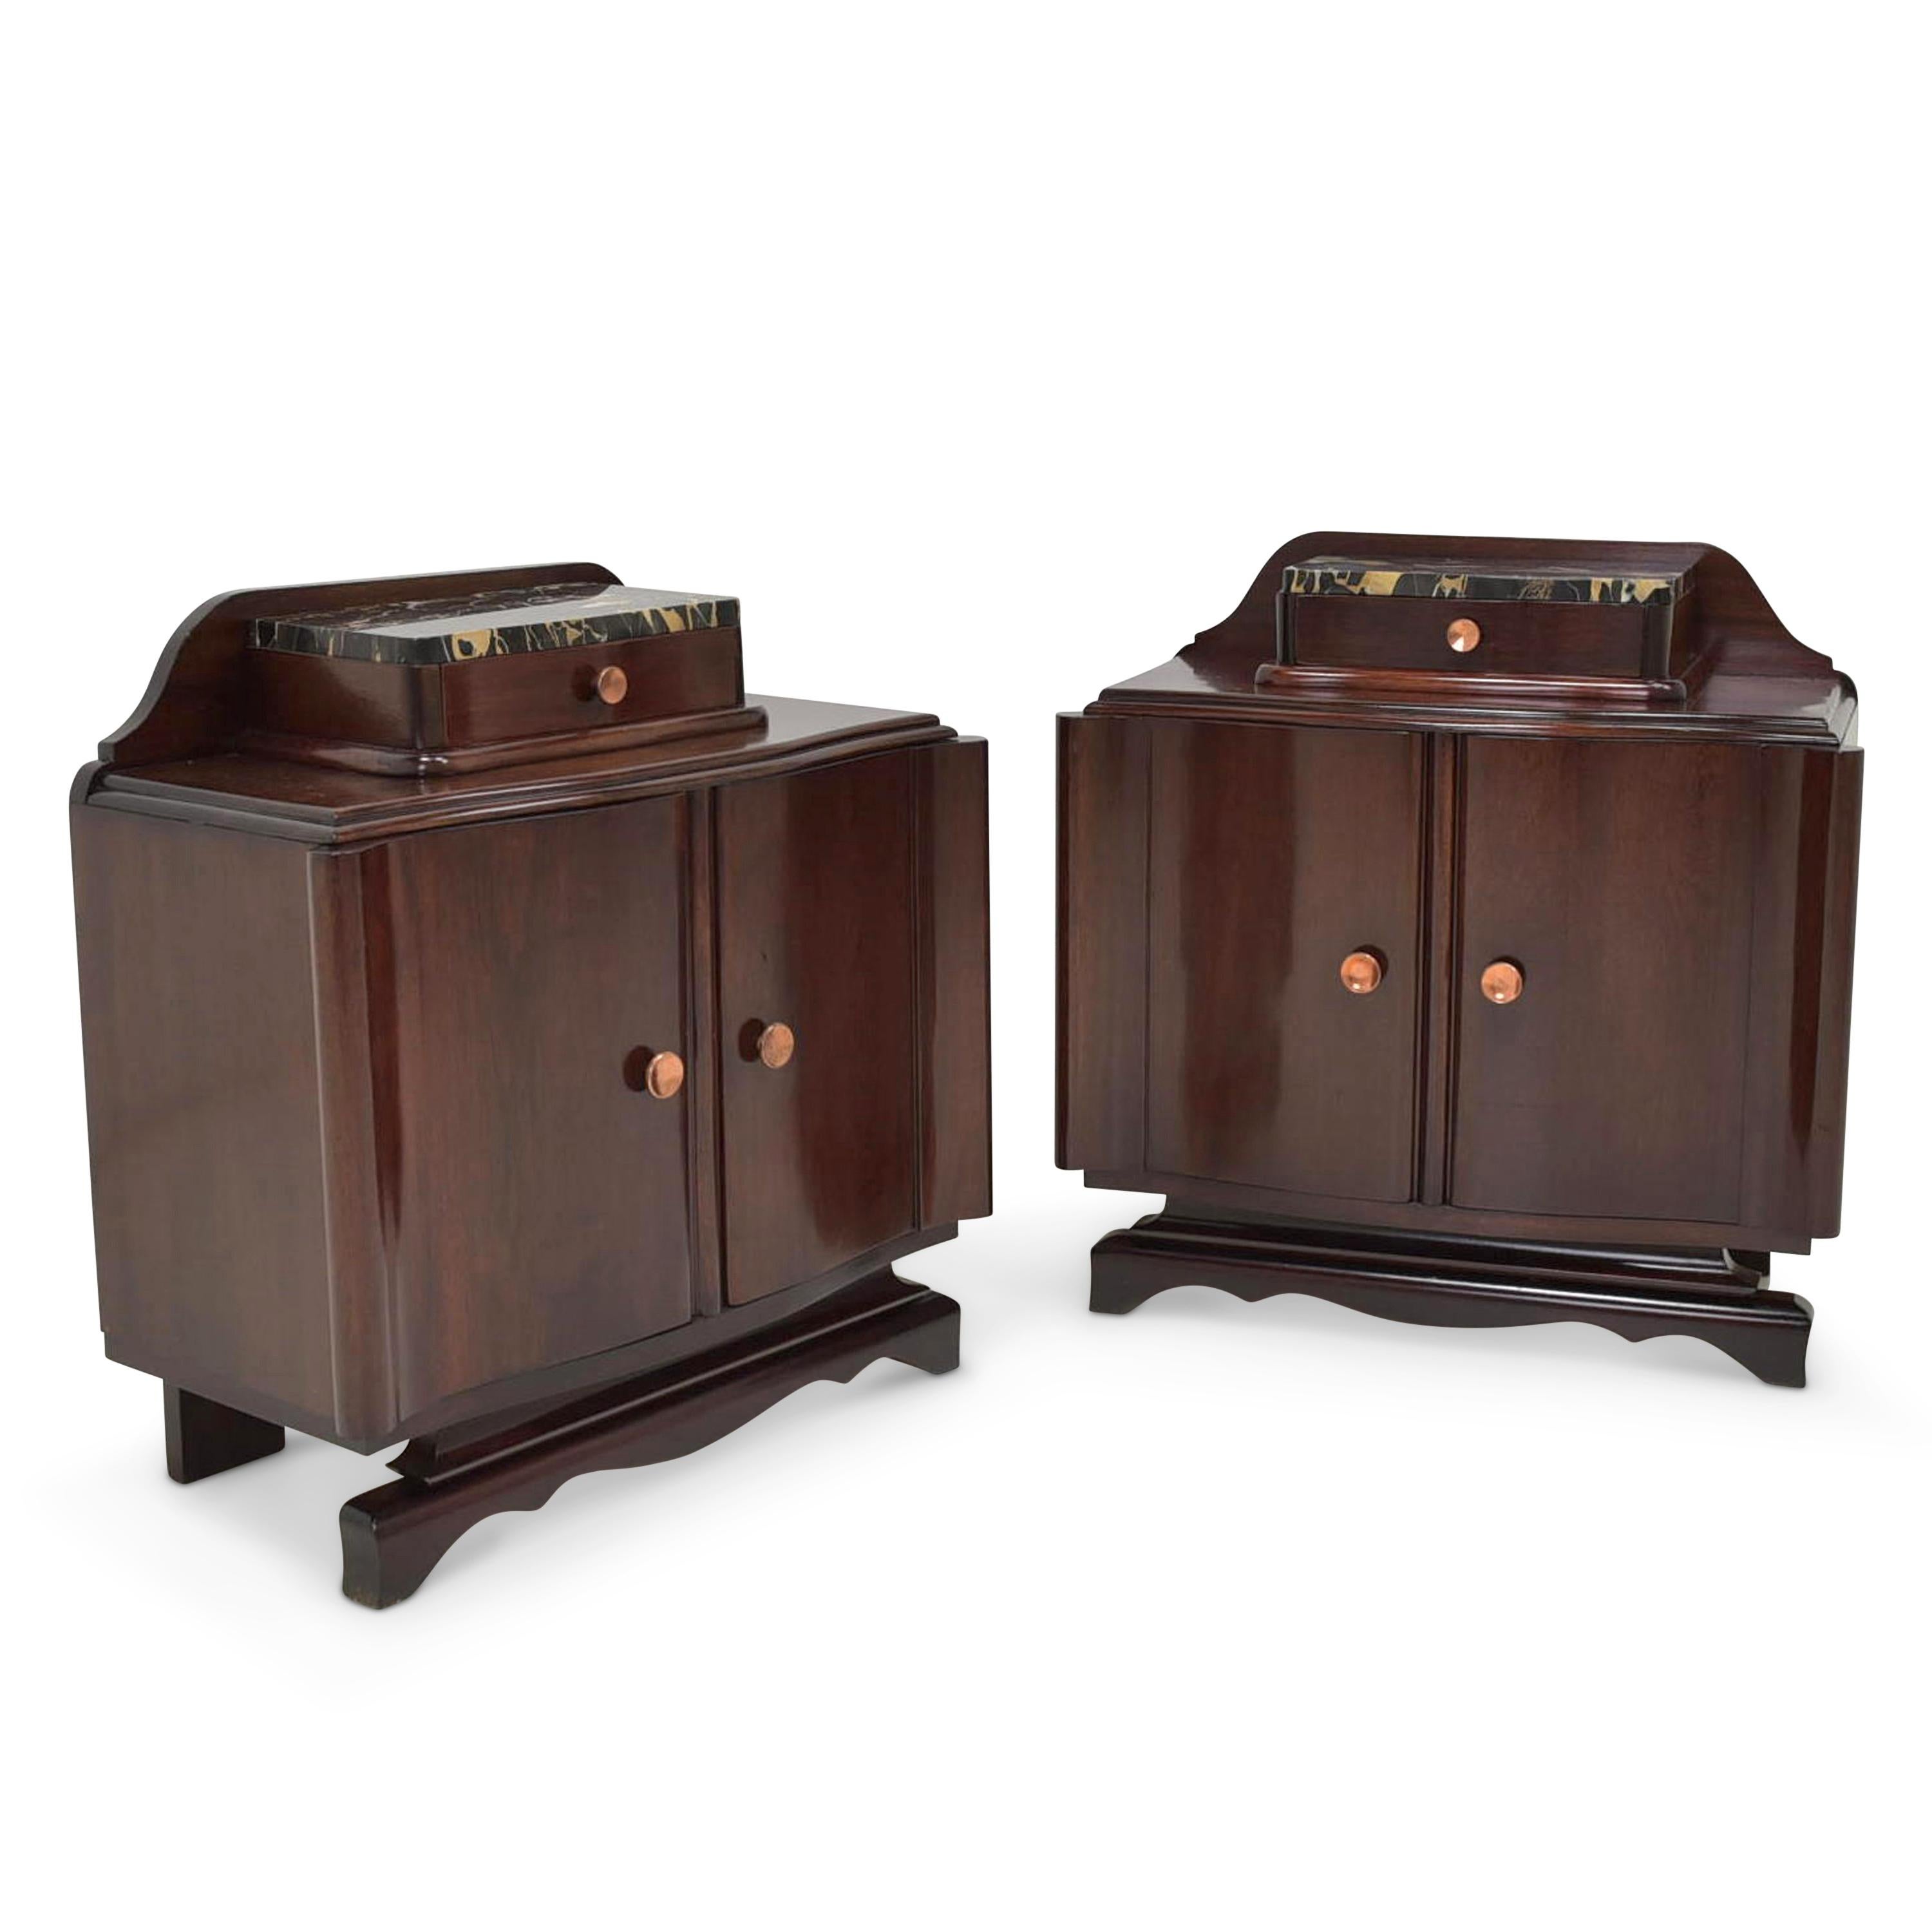 Pair of nightstands restored Art Deco circa 1930 mahogany nightstand

Features:
Each with two doors with a small drawer and a shelf
Very high quality processing
Drawers pronged
Original marble slabs
Original handles
Beautiful